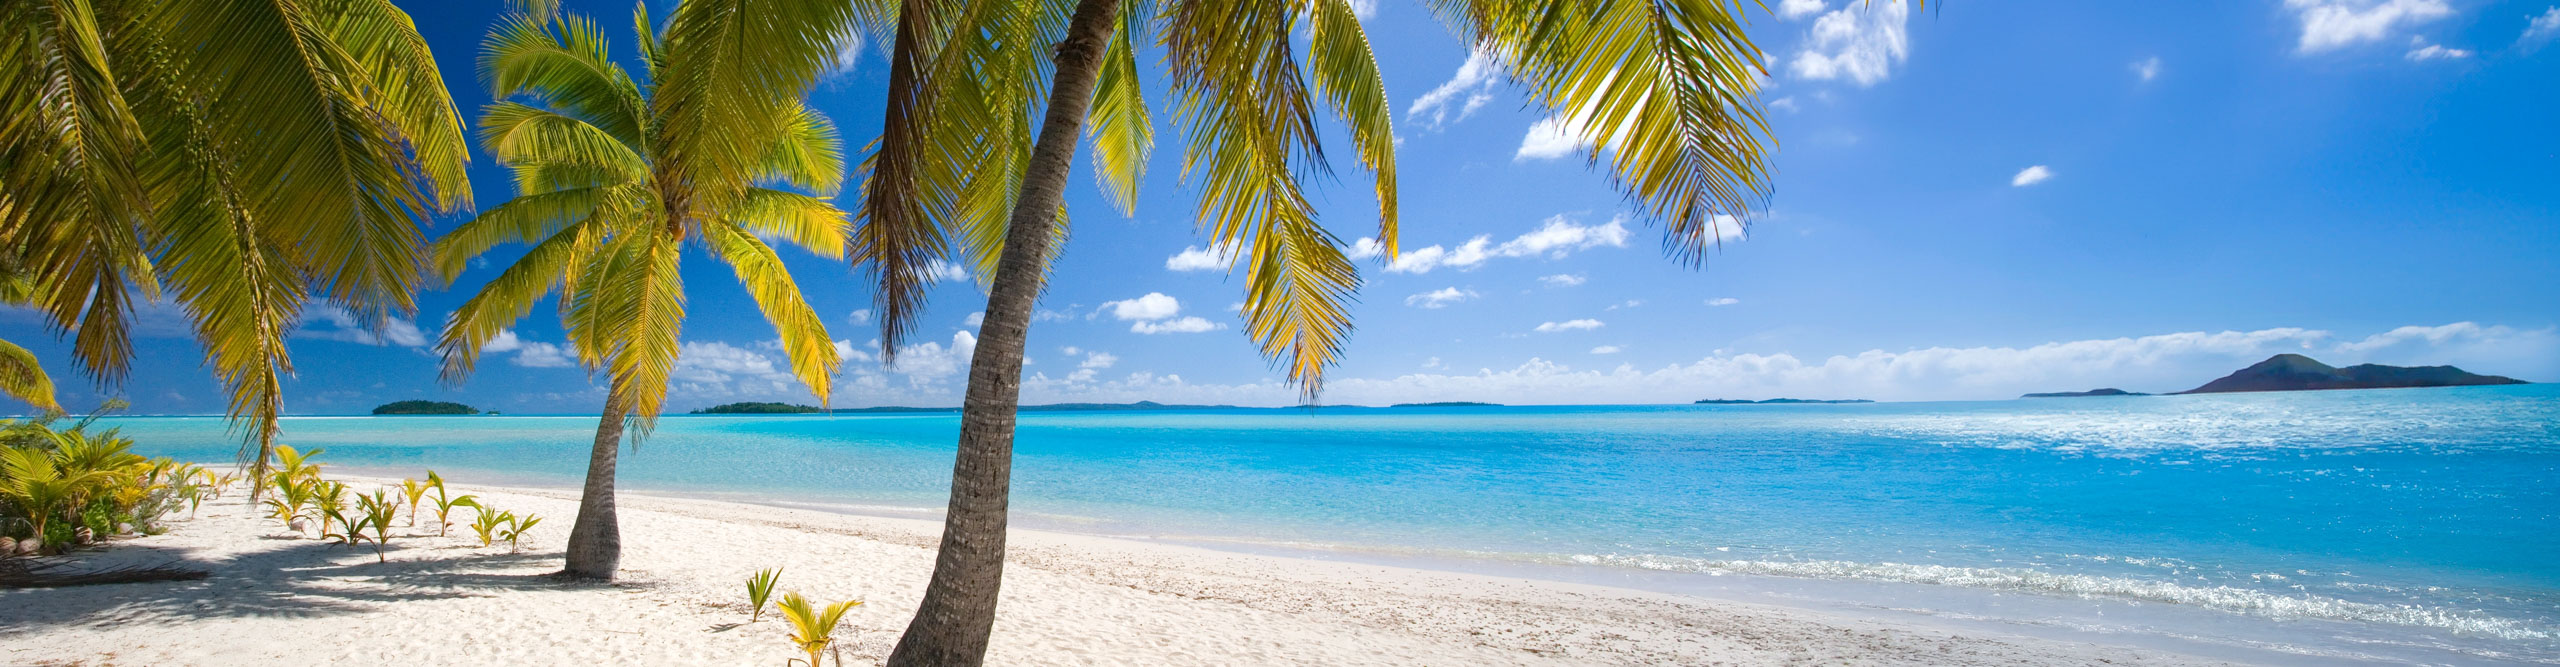 Palm tree hanging over Aitutaki beach on a clear sunny day, Cook Islands 